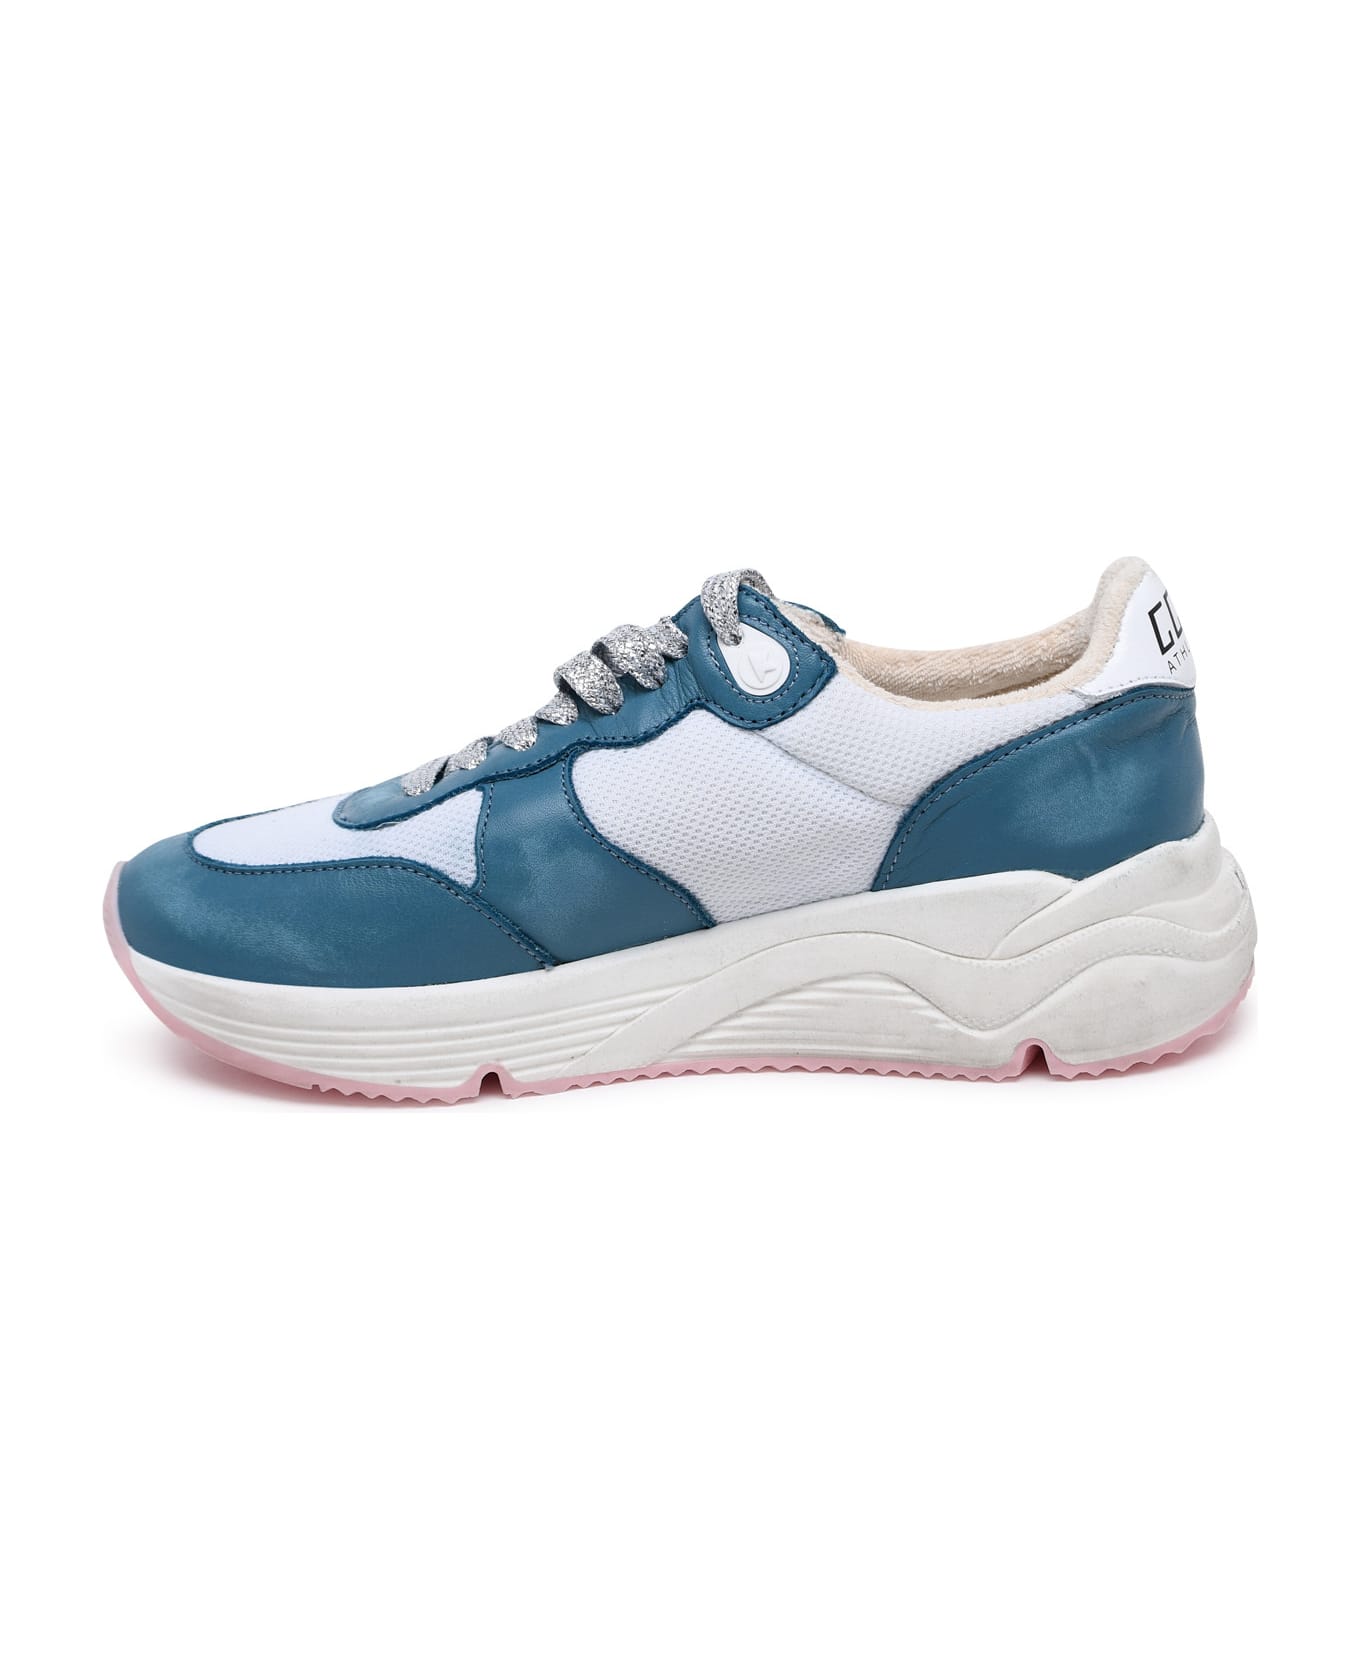 Golden Goose Running Sole Two-color Leather Blend Sneakers - turquoise